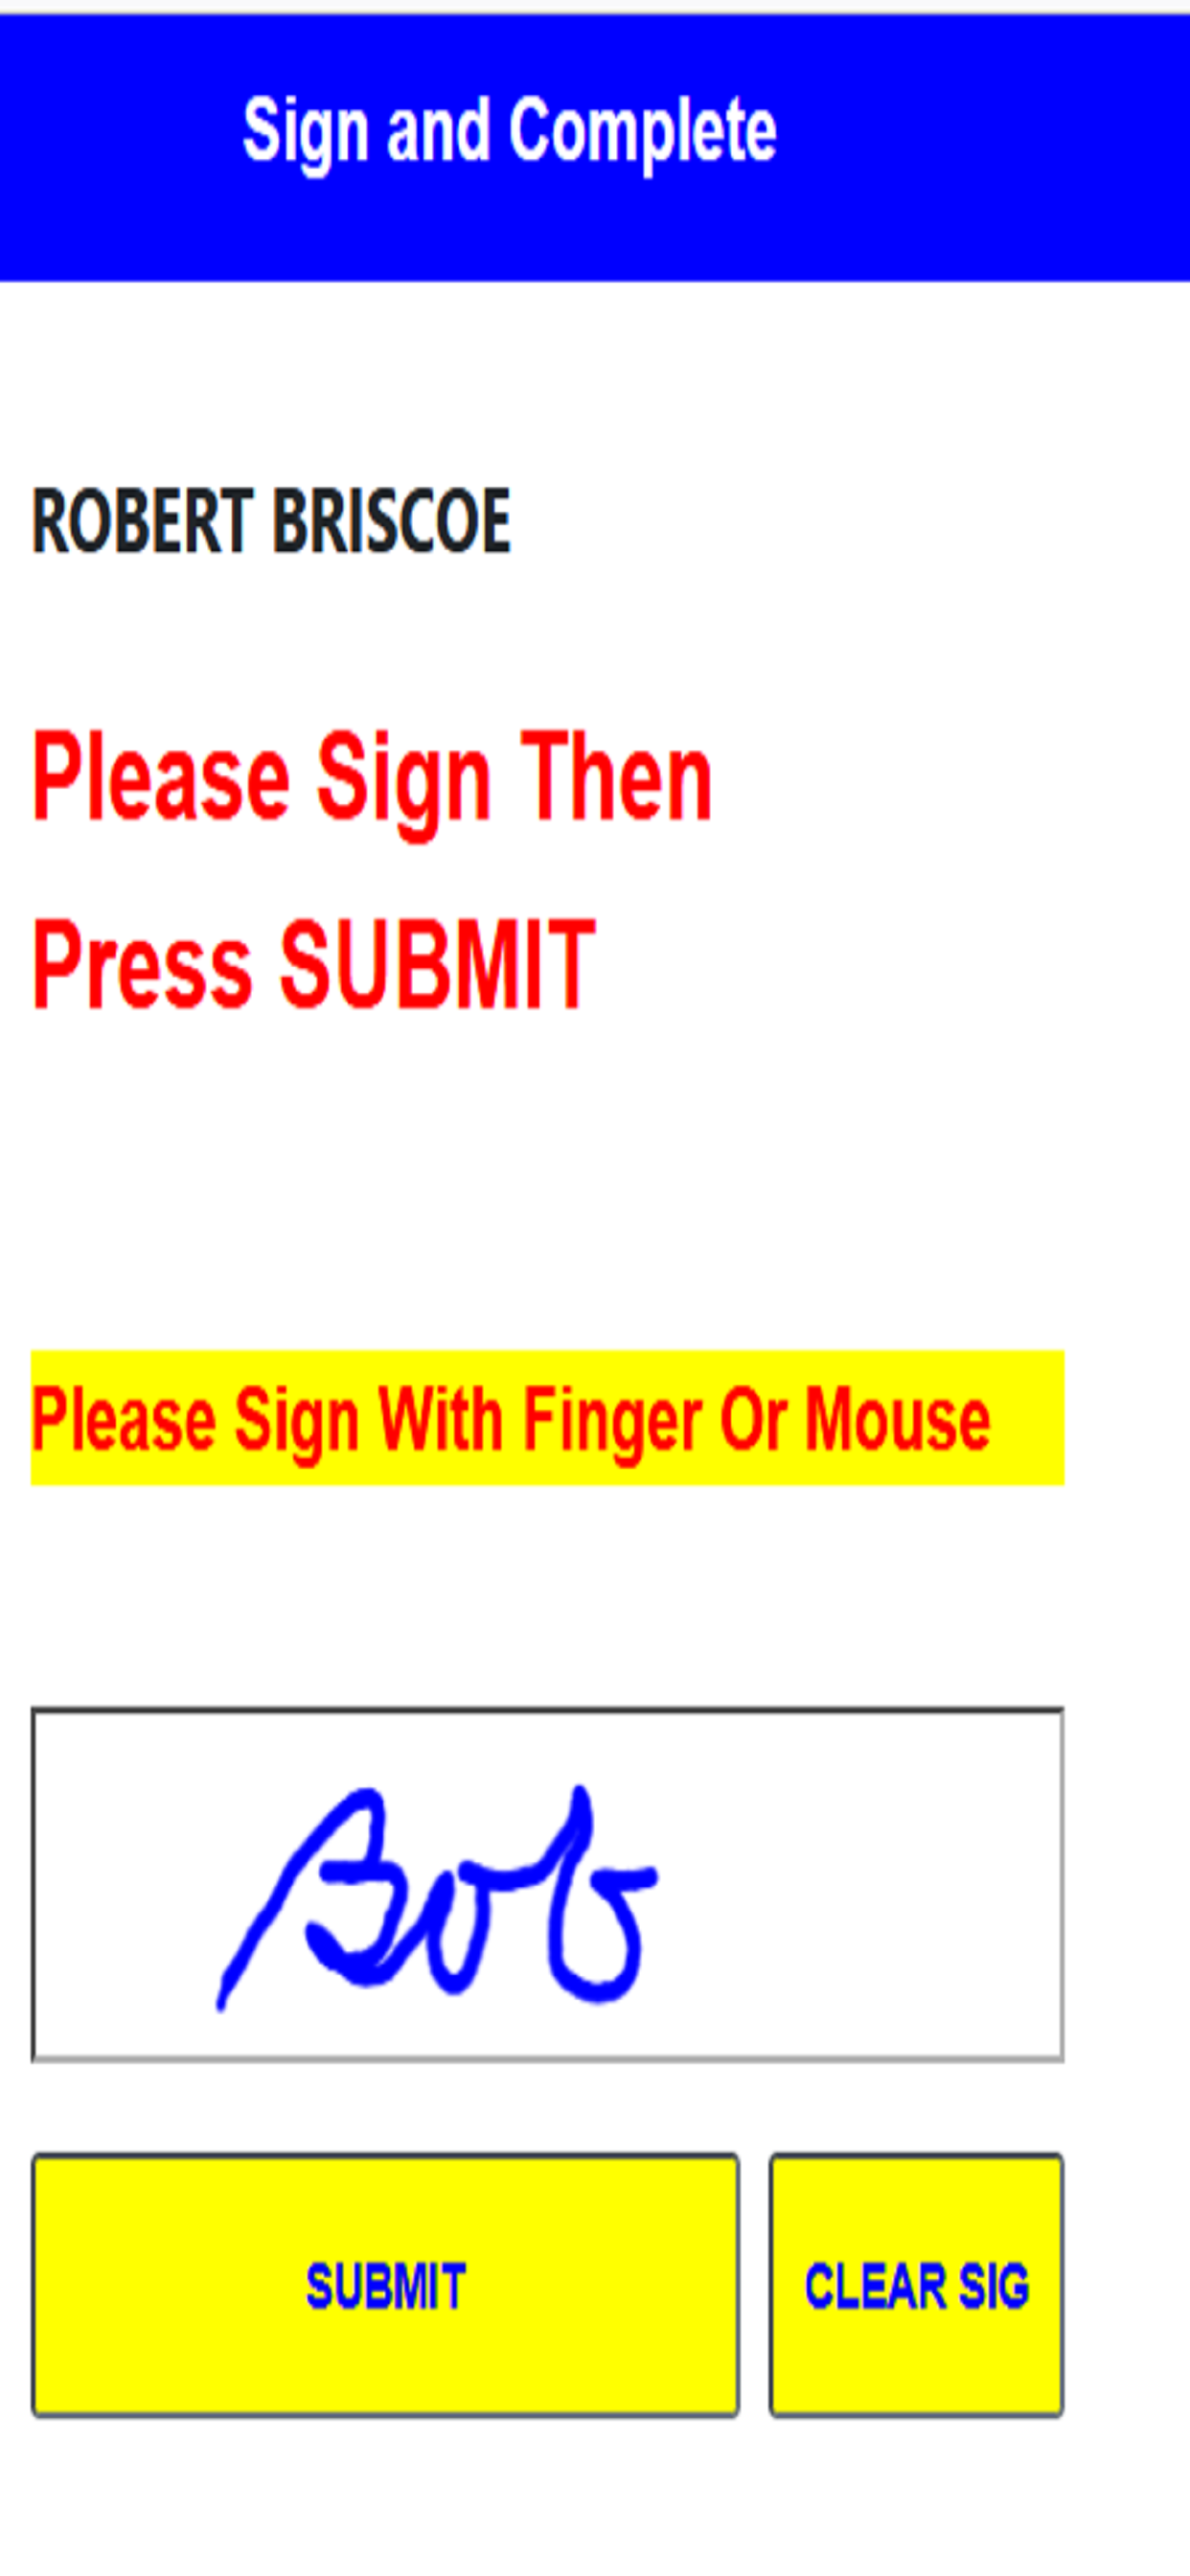 Just sign and press SUBMIT to transmit data